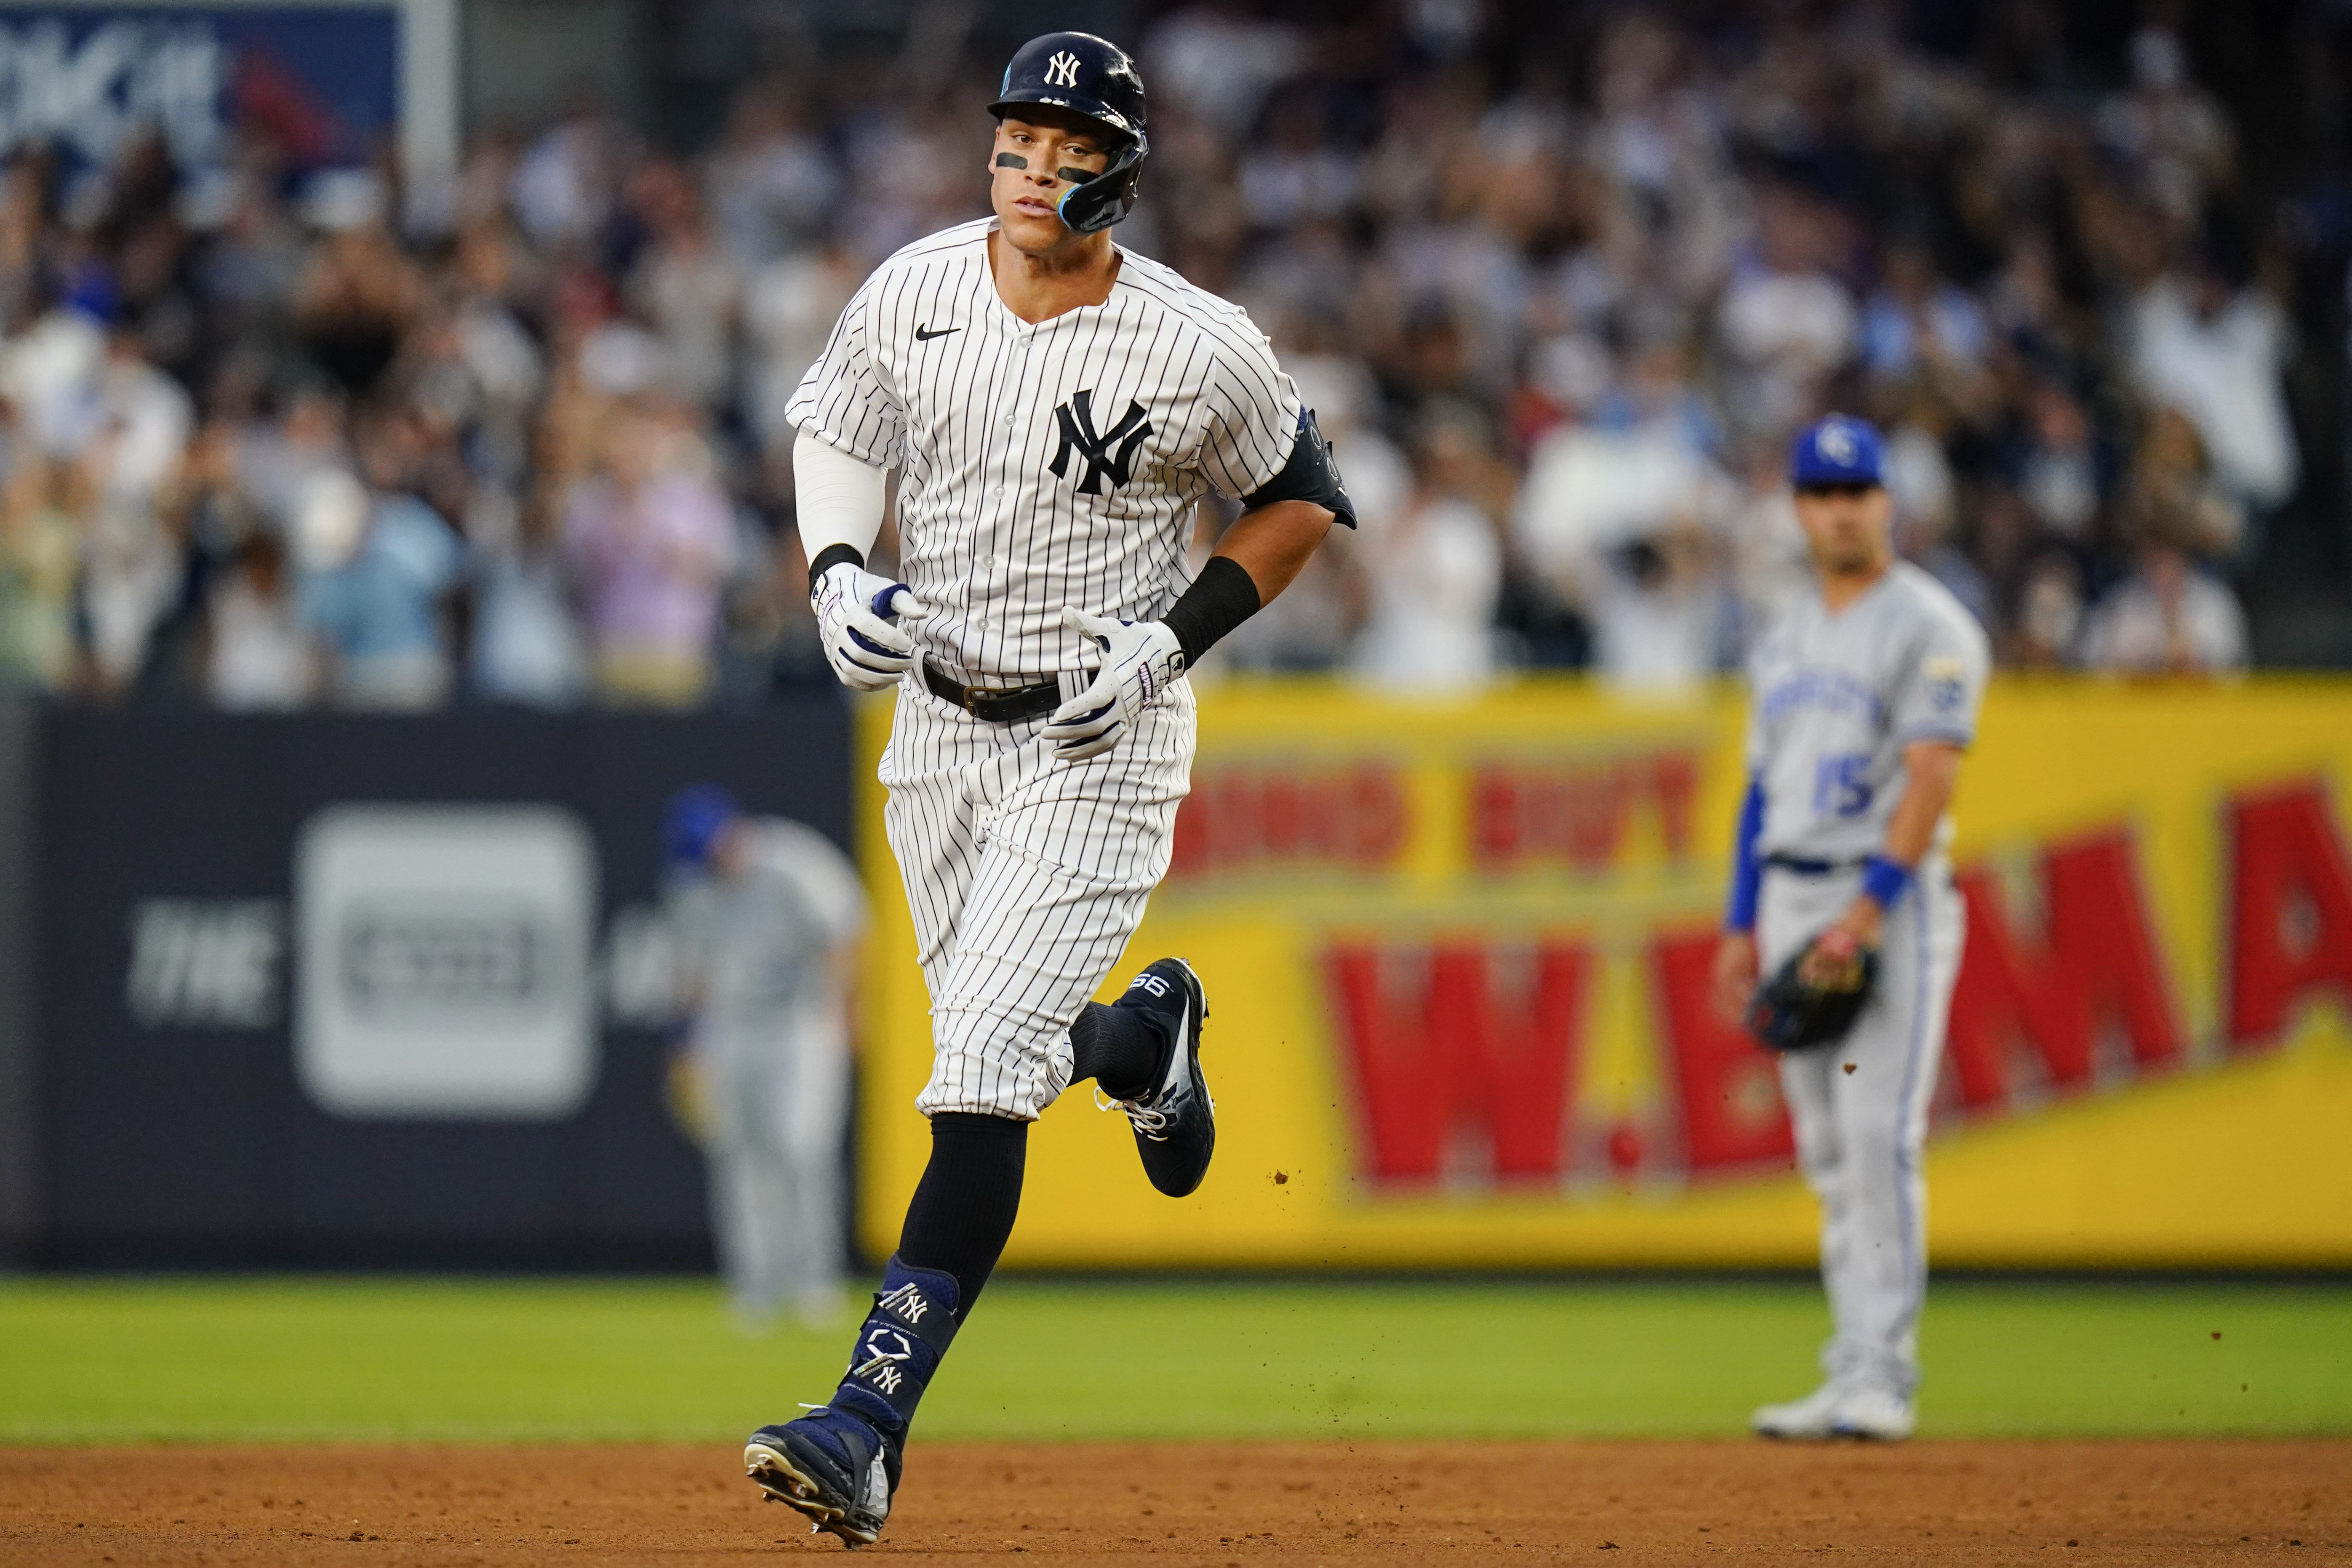 NY Giants legend reveals why he's worried about Yankees' Aaron Judge